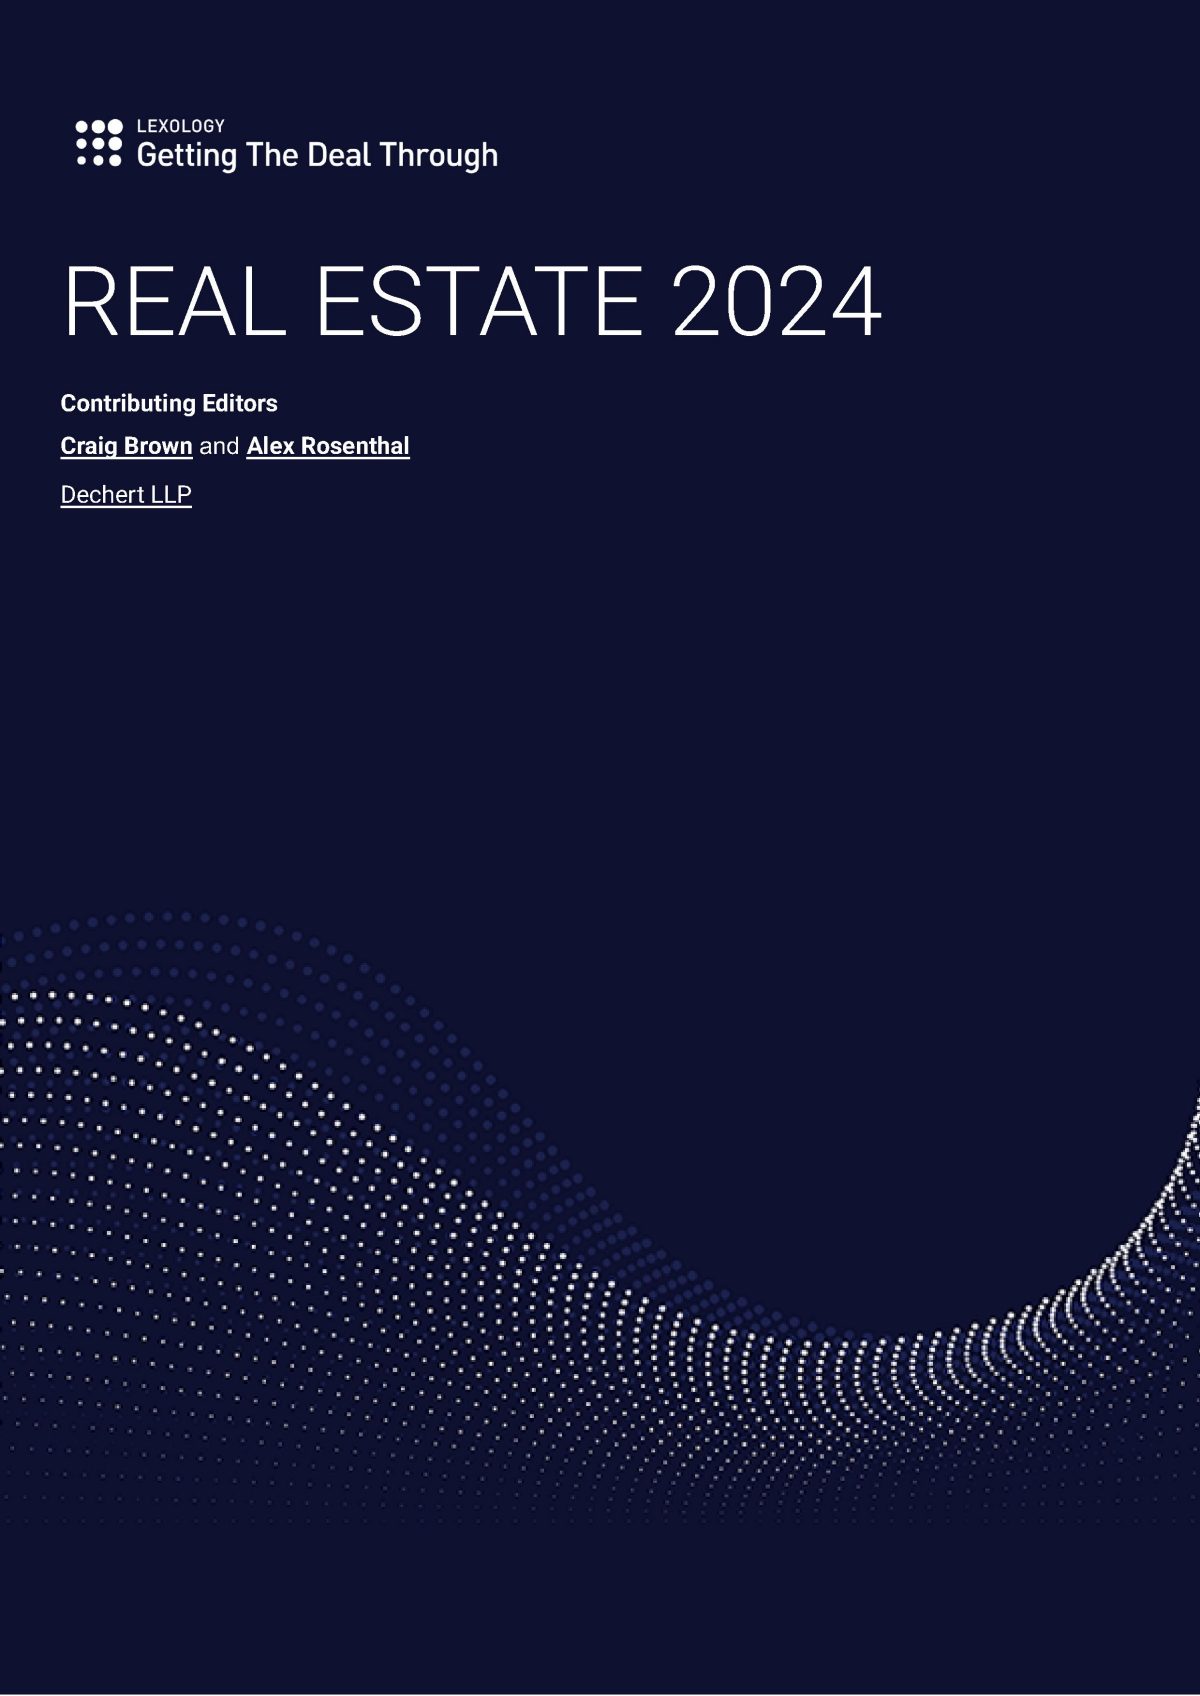 Dark blue cover image of the Lexology Real Estate 2024 guide with contributing editors Craig Brown and Alex Rosenthal attributed.